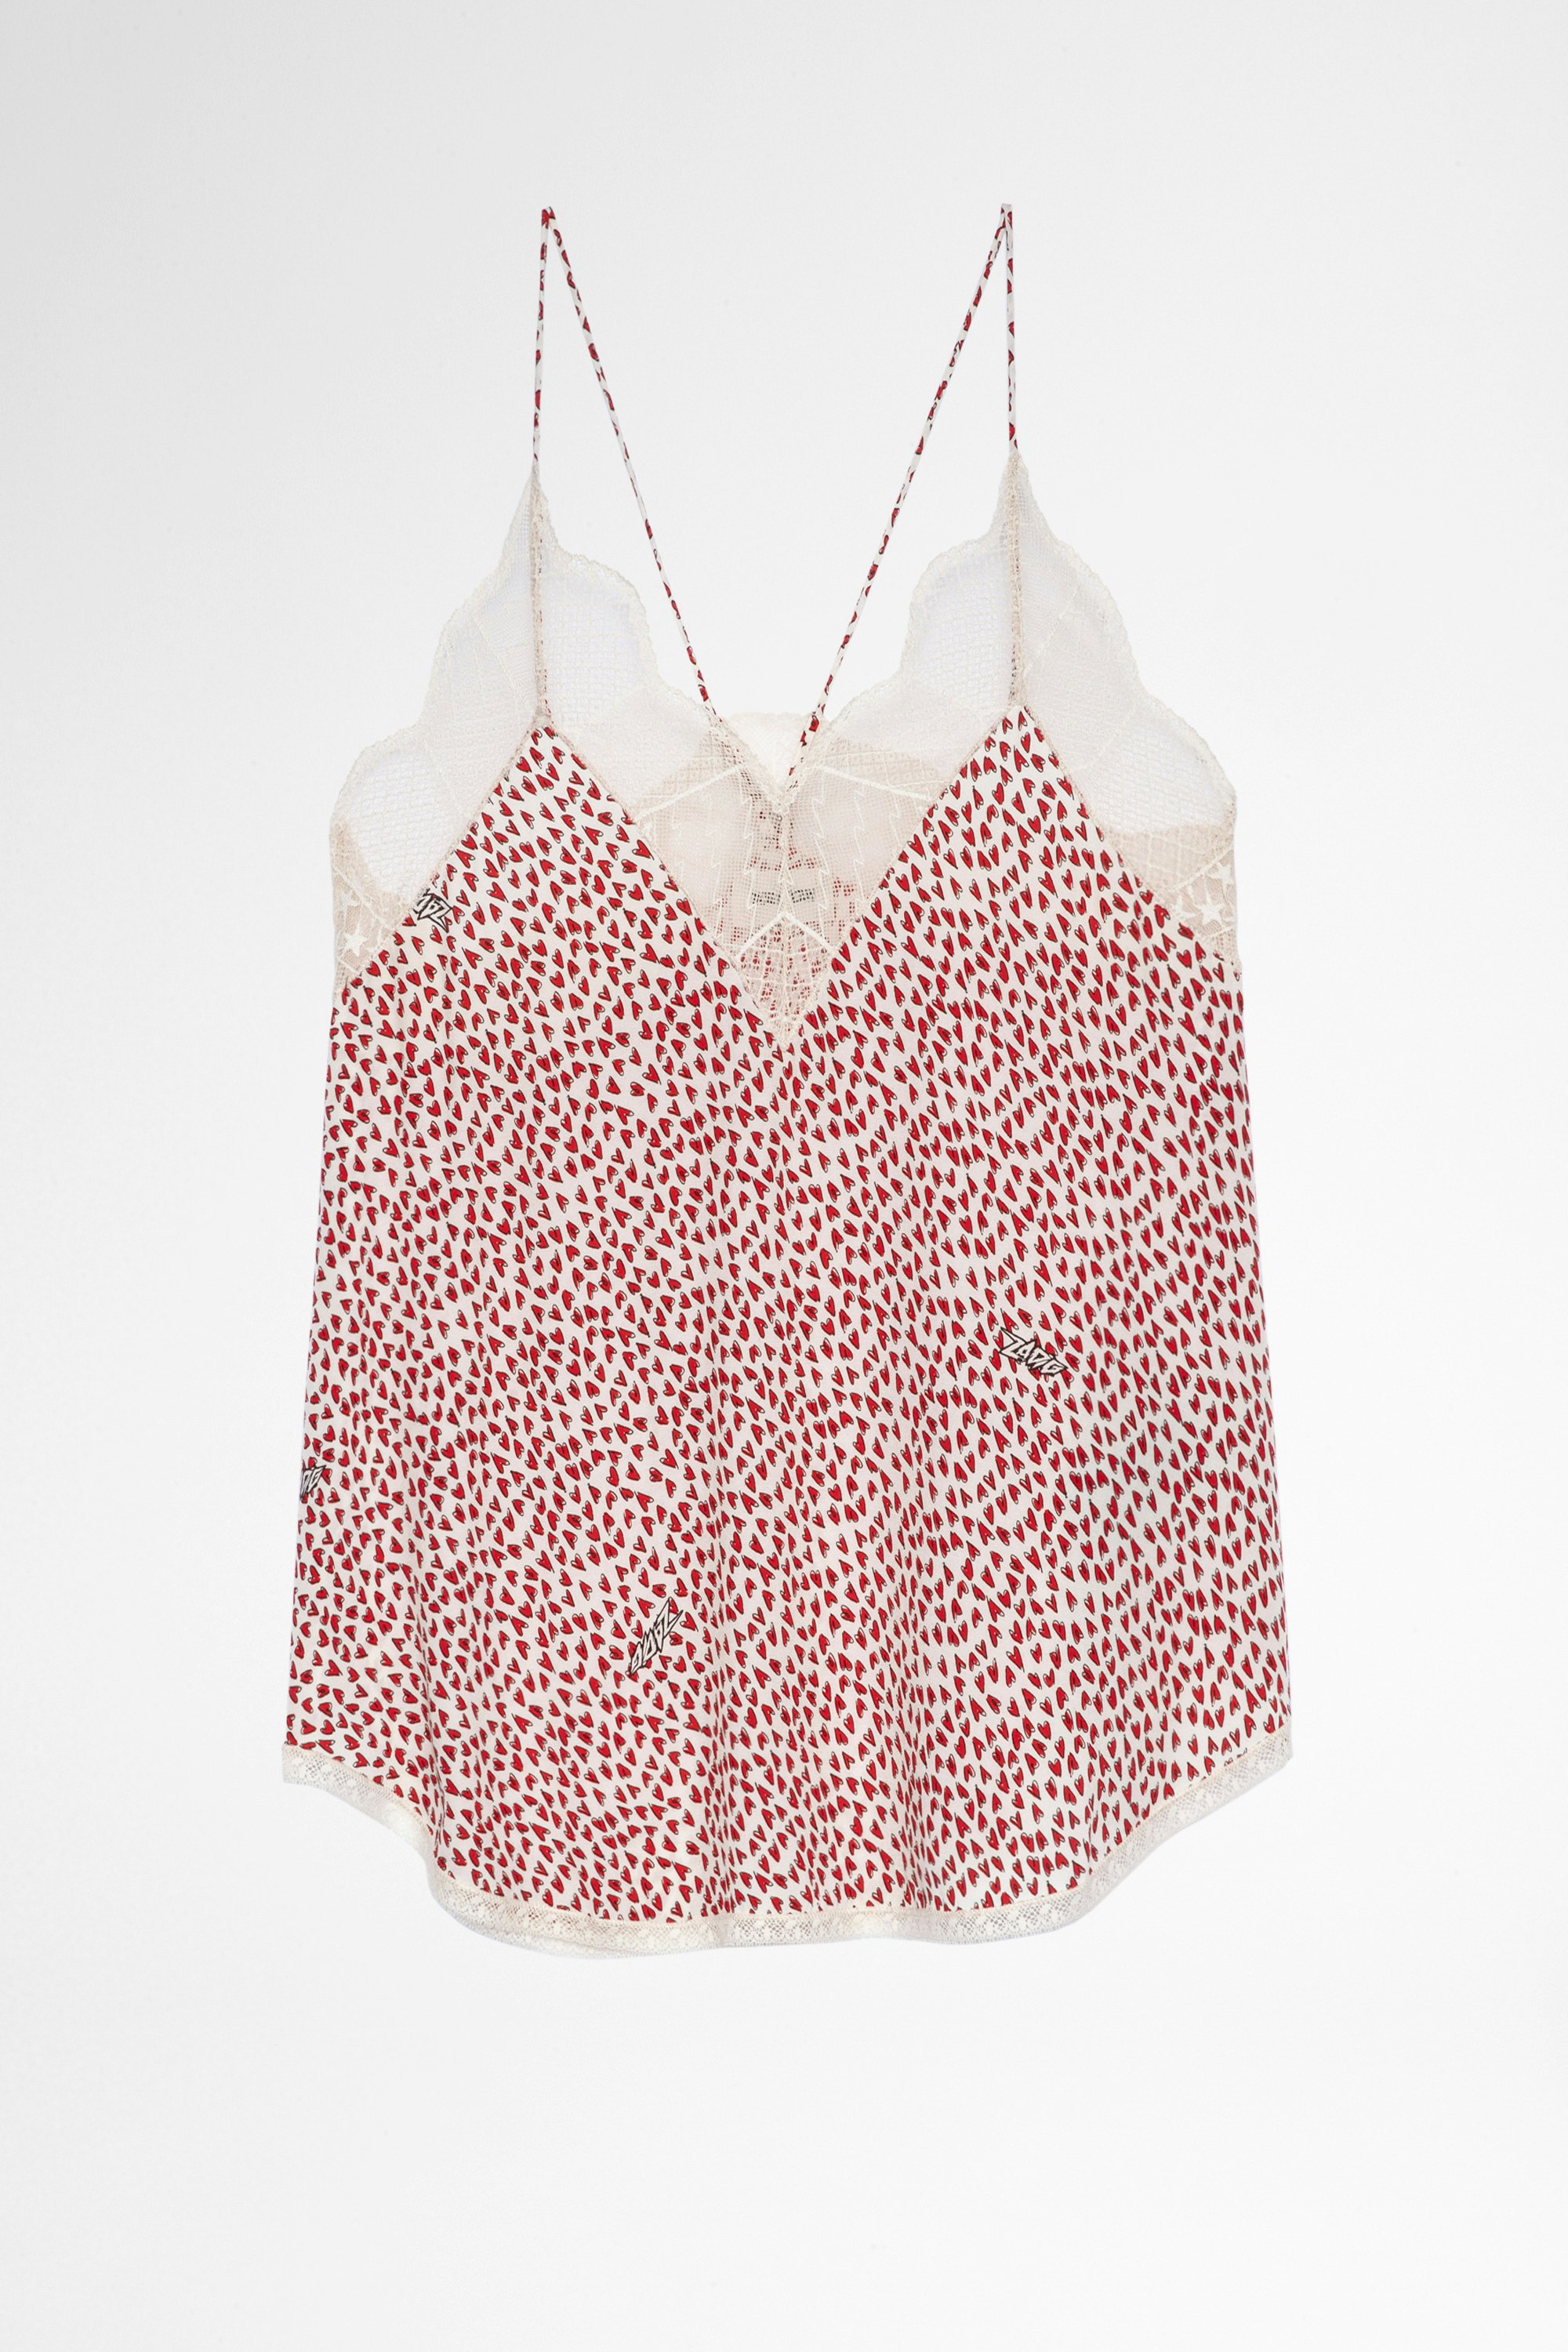 Christy Camisole Women's beige heart-print camisole. Made with fibers from sustainably managed forests.